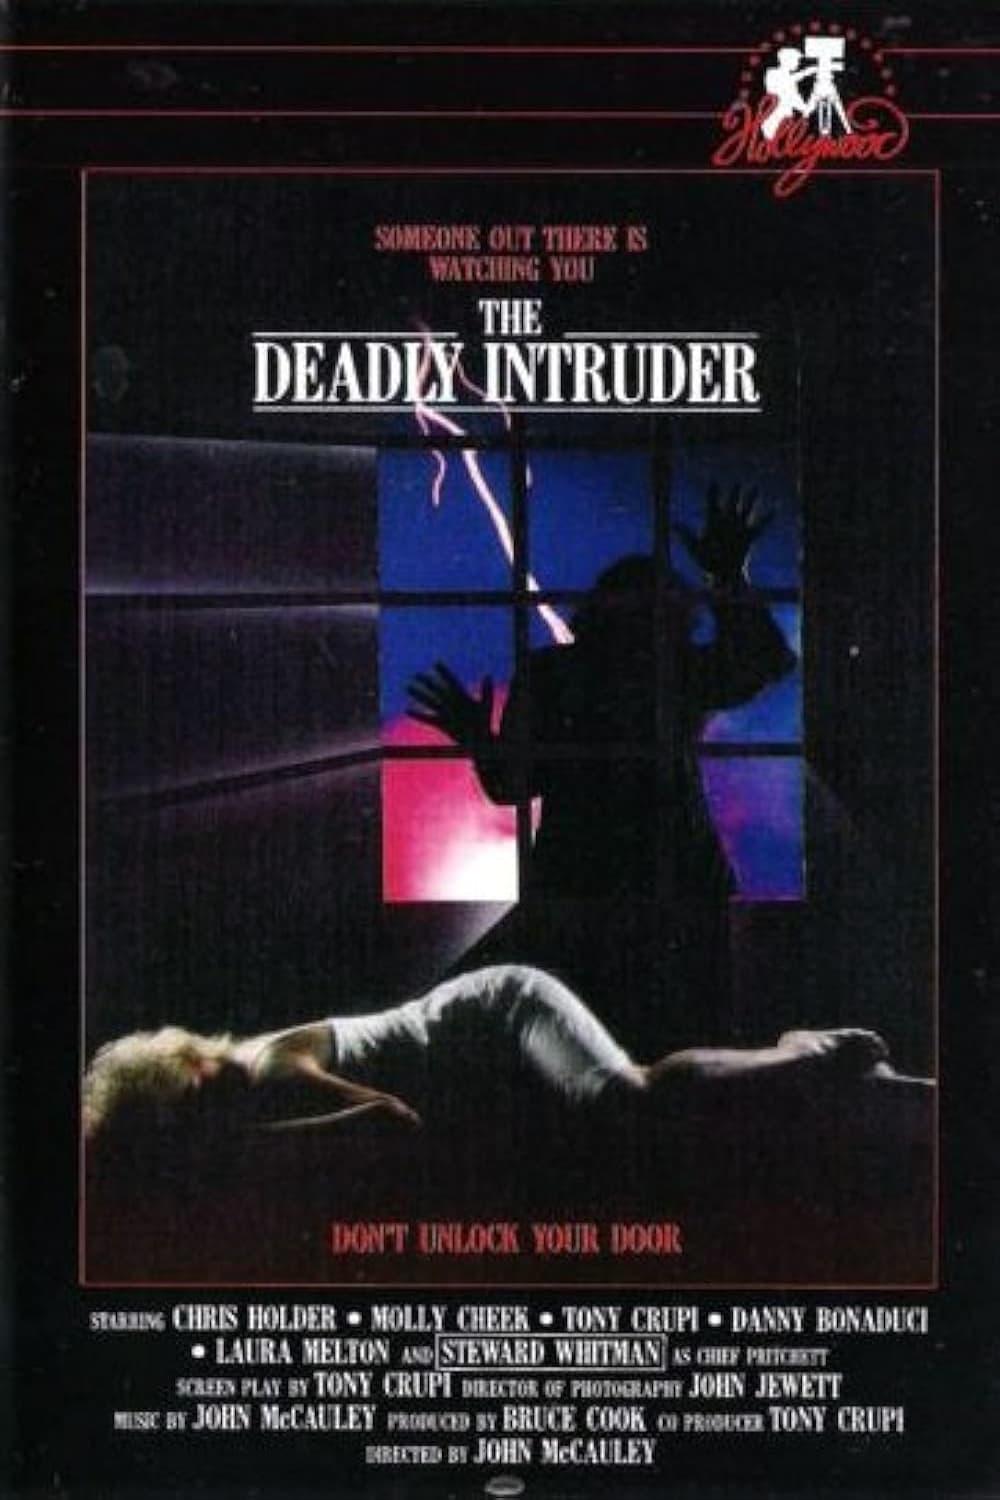 The Deadly Intruder poster